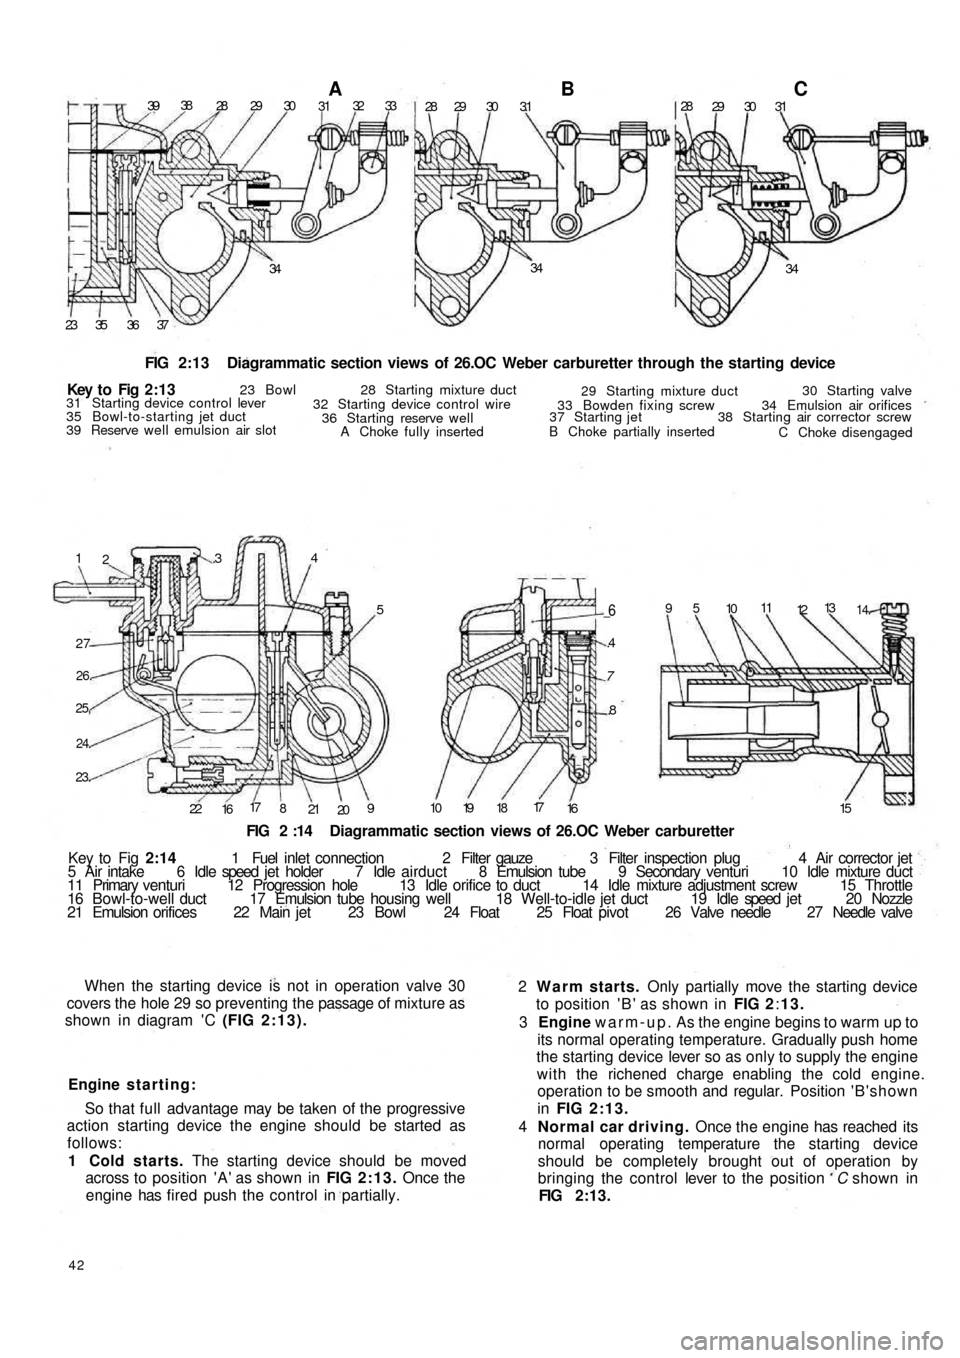 FIAT 500 1959 1.G Workshop Manual 3938
28 29 30A3132 33
28 29 30 3.1B28
29 30 31C
34 34
34
37 36 35 23
FIG 2:13  Diagrammatic section views of 26.OC Weber carburetter through the starting device
1
2.34
5
27
26.
25,
24.
23.
22
1617
8
2